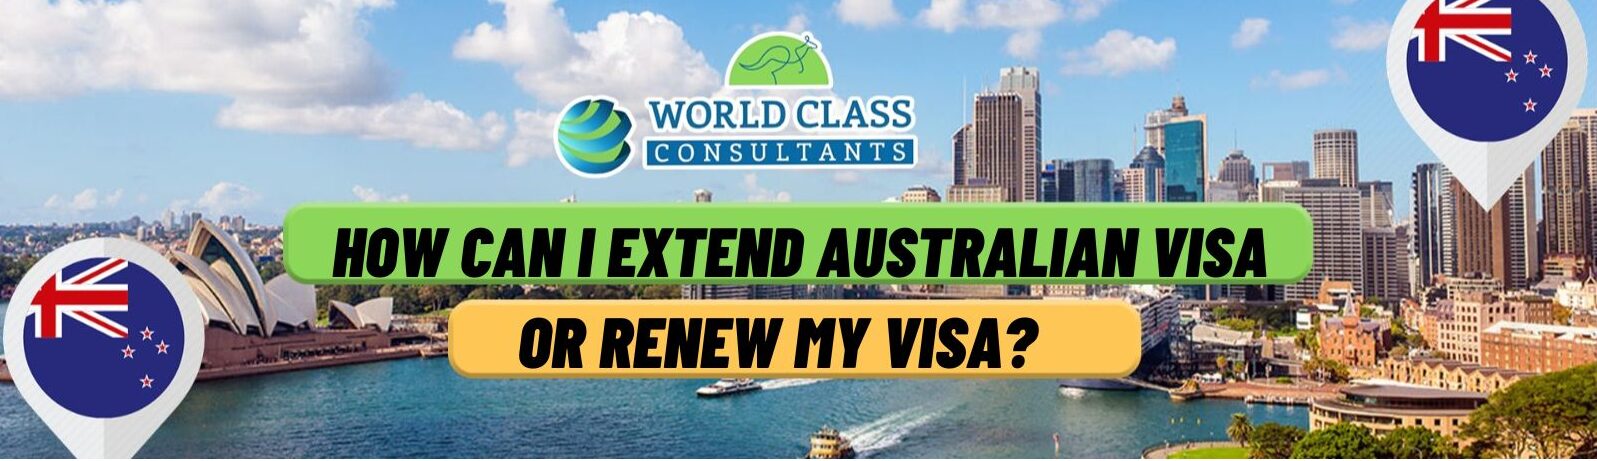 Australian visa types displayed, symbolising options for extending visas while in country.